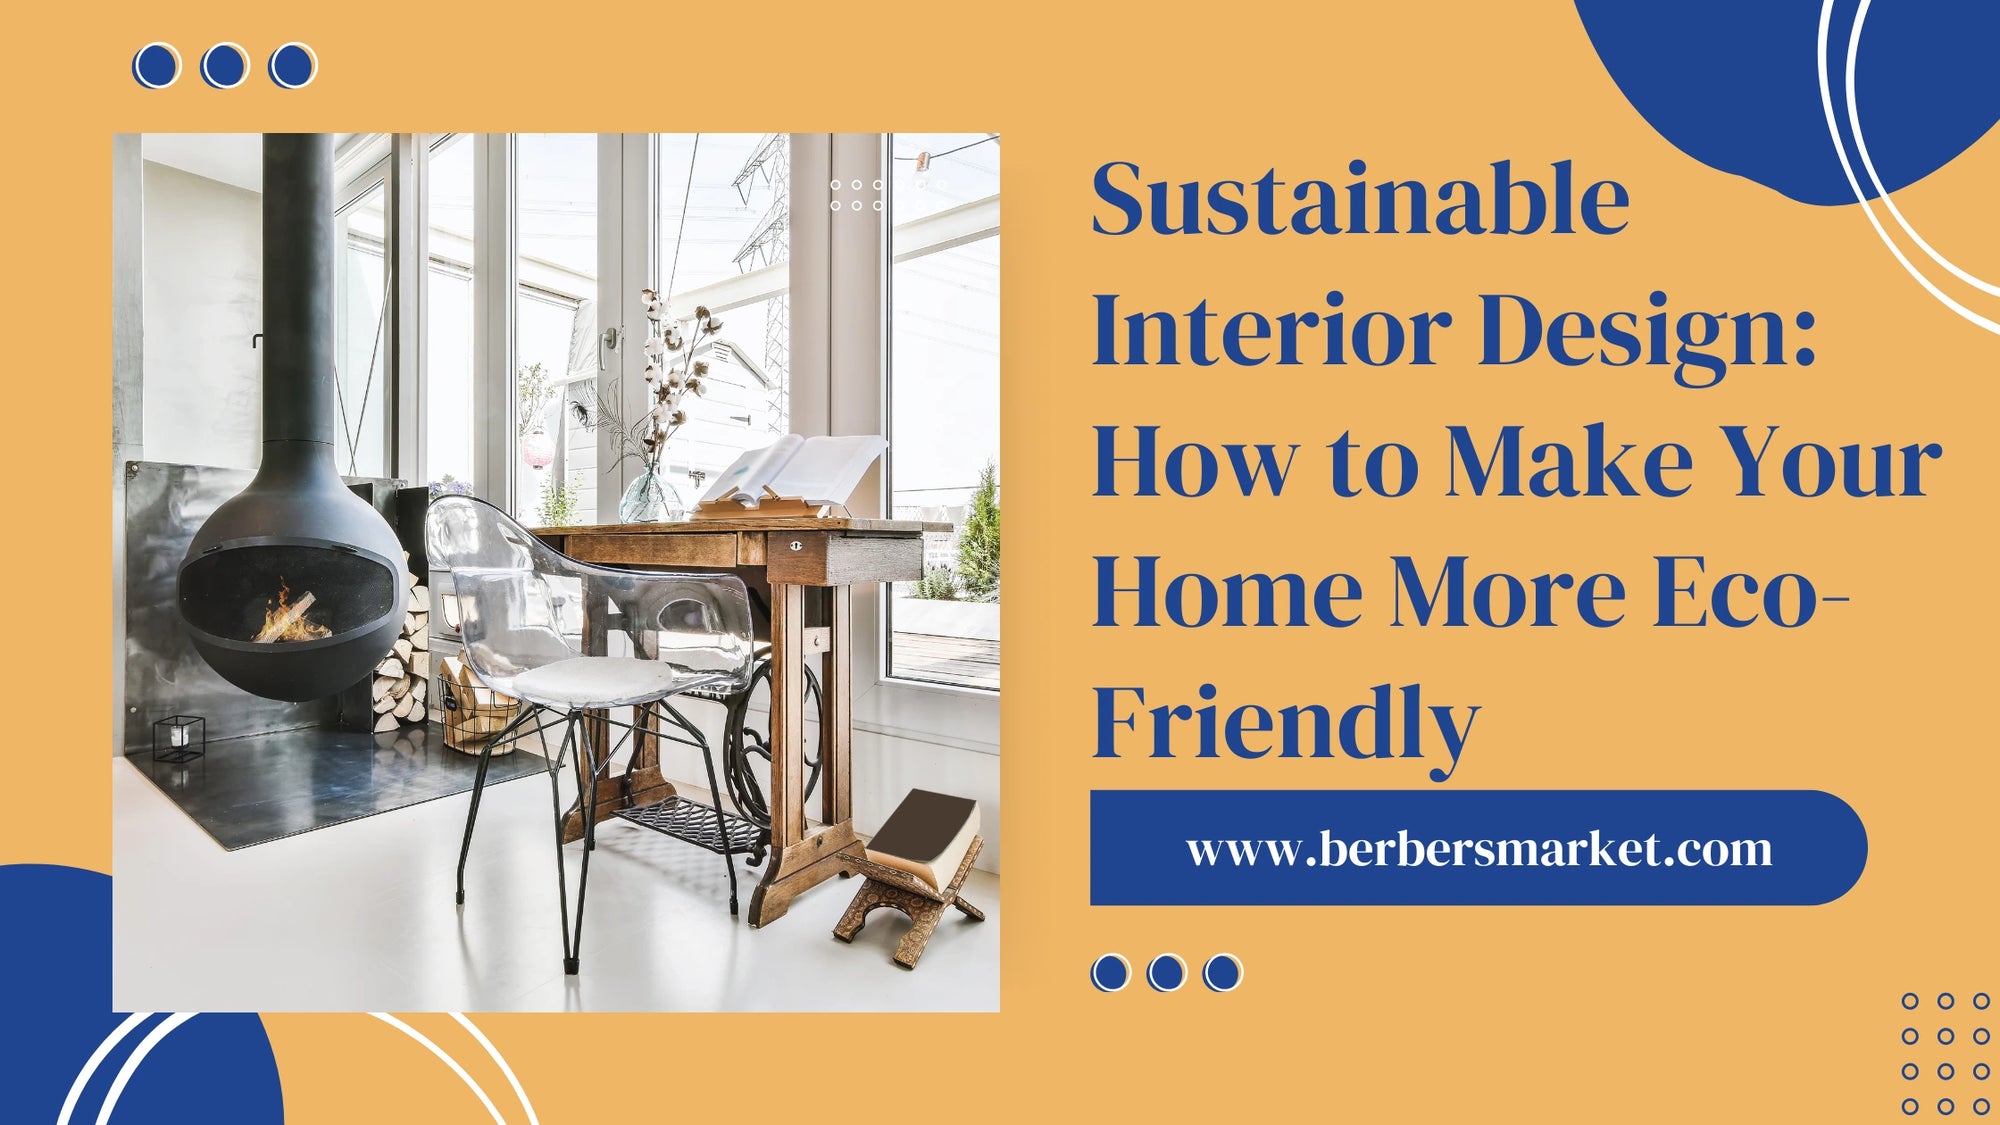 Blog banner talking about: "Sustainable Interior Design How to Make Your Home More Eco-Friendly" with a picture showing a modern interior design with a recycled antique desk and a well insolated fireplace.